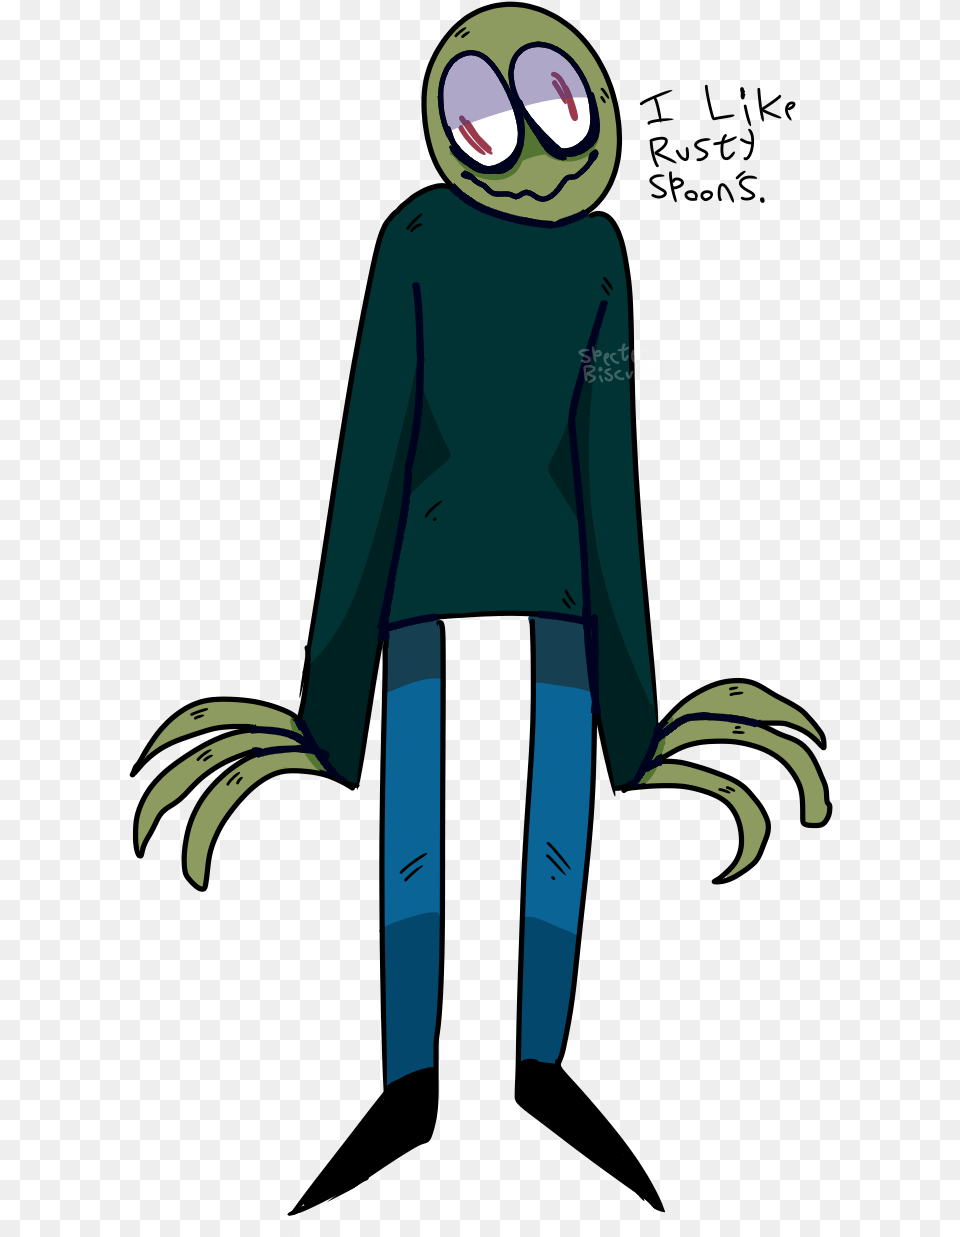 Salad Fingers By Specterbiscuits Salad Fingers By Specterbiscuits Salad Fingers, Clothing, Sleeve, Long Sleeve, Knitwear Png